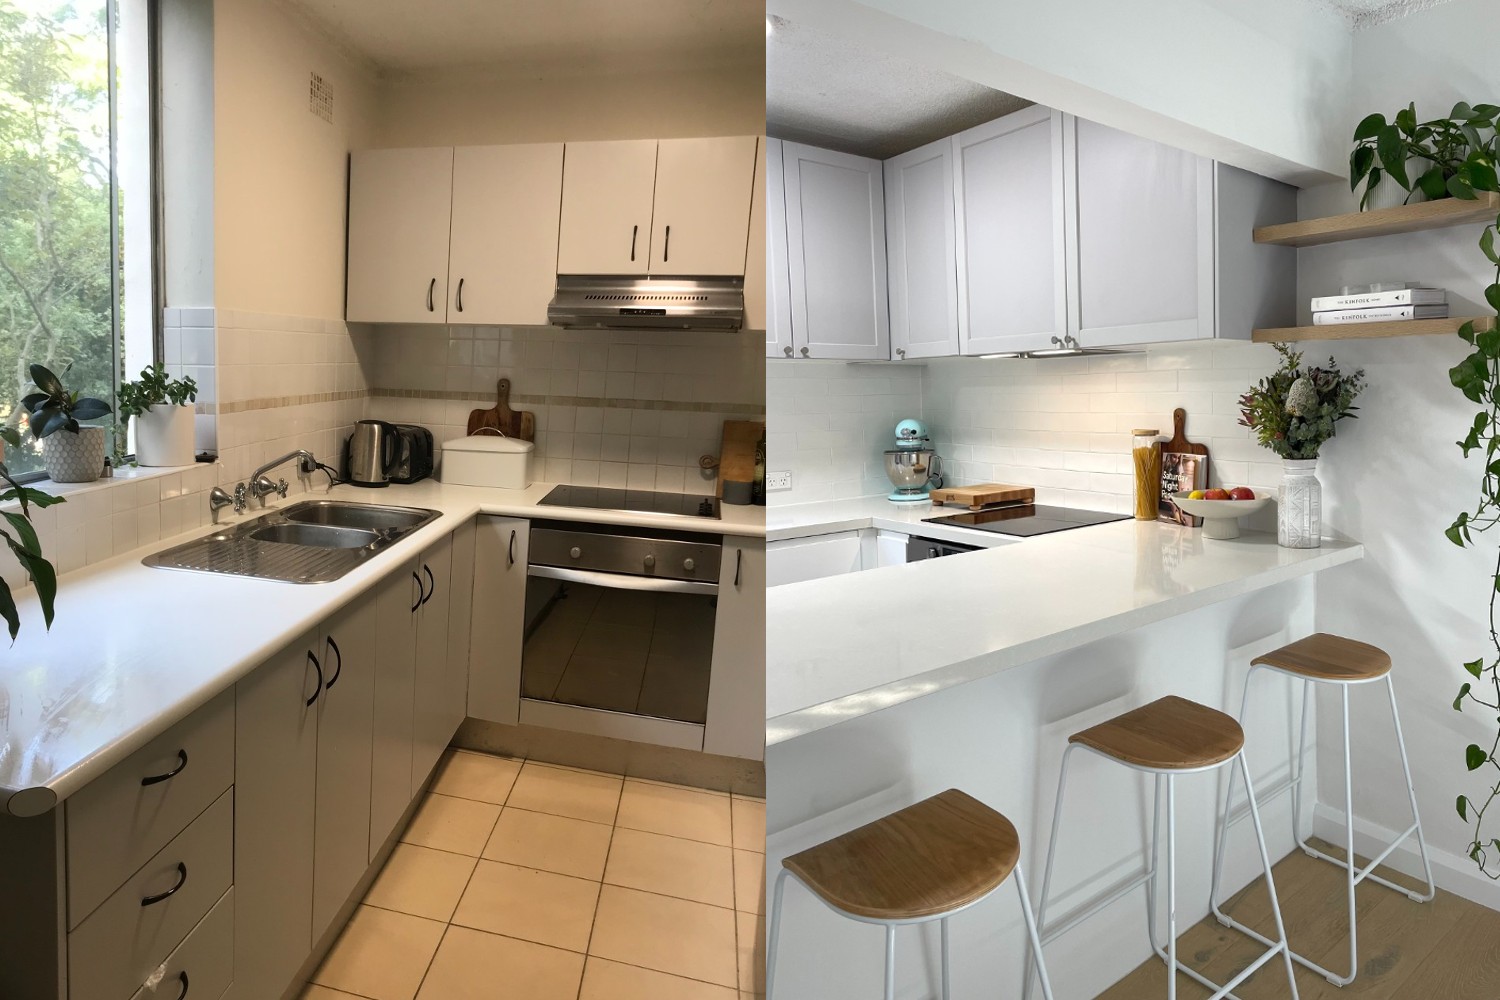 This is what a 15k Ikea kitchen renovation looks like